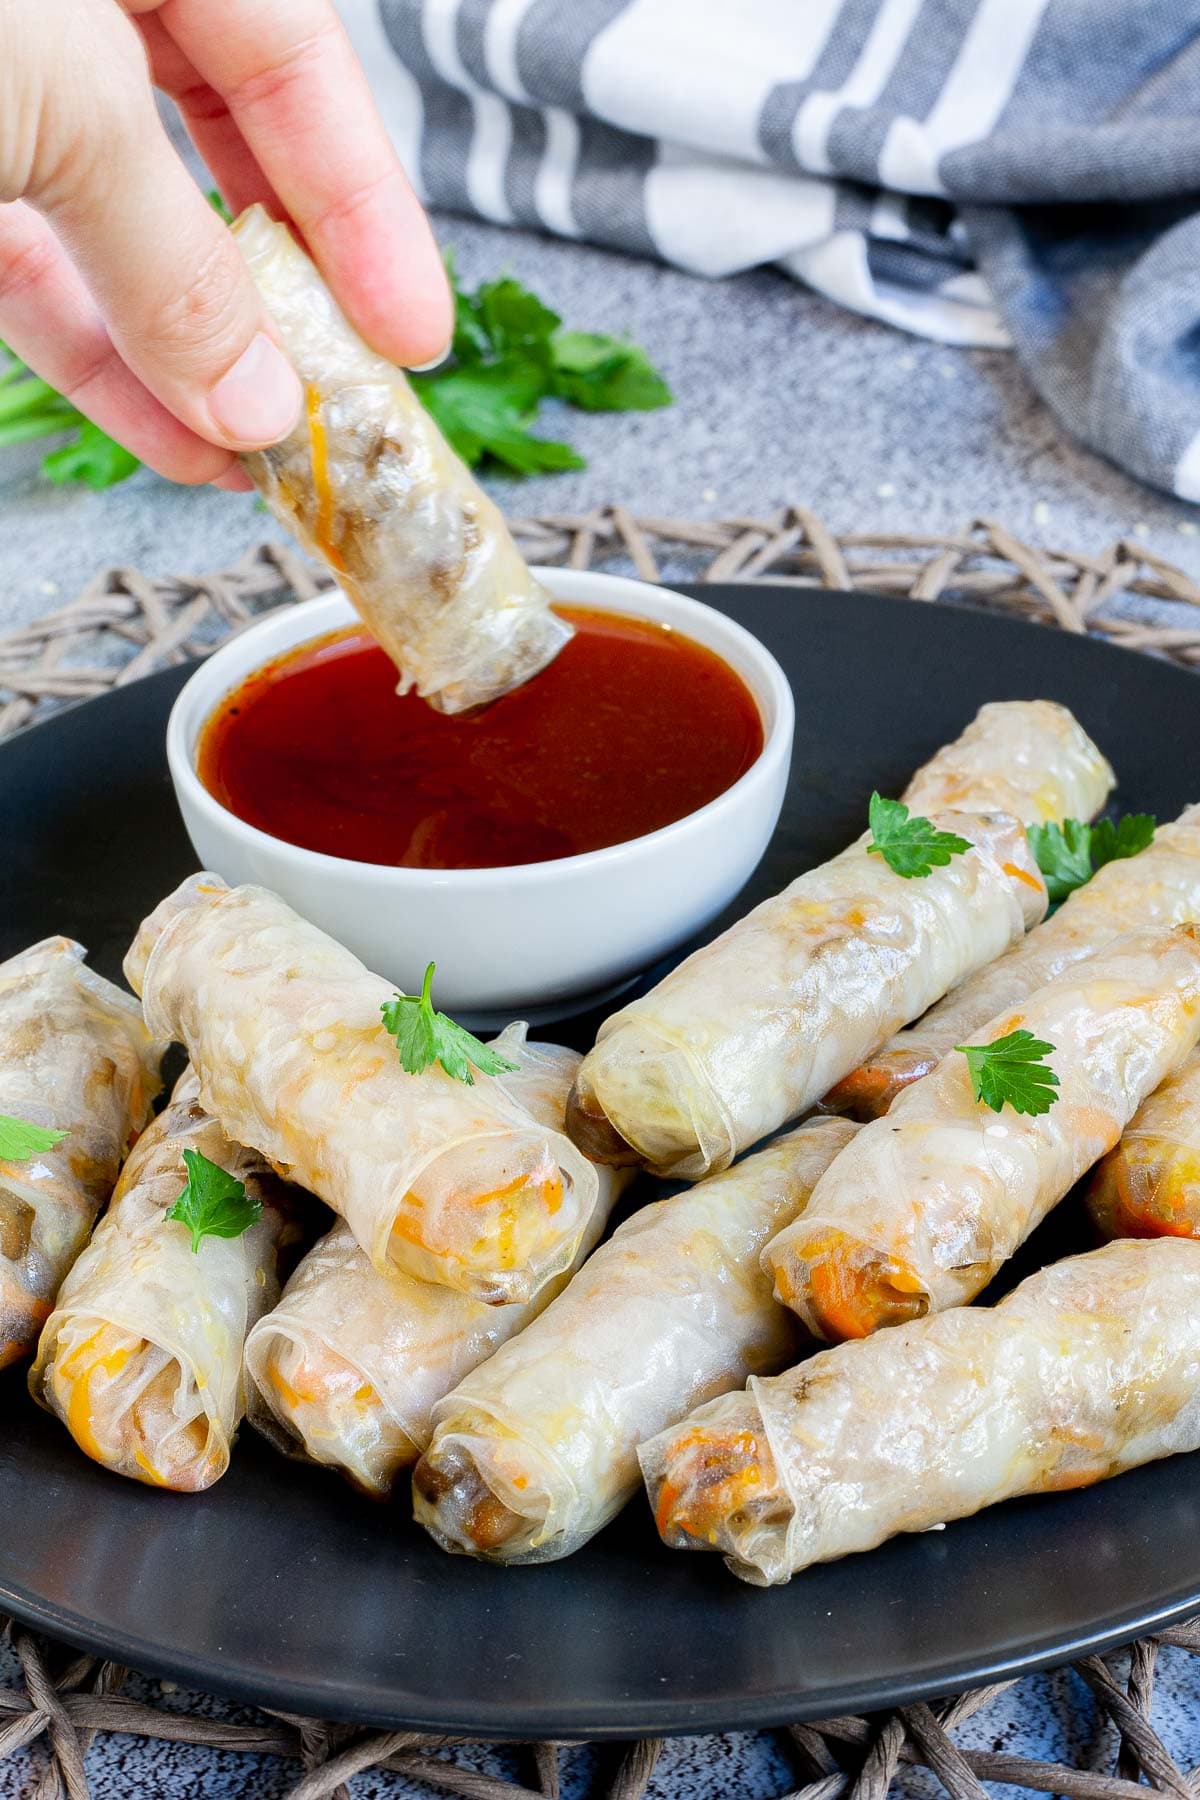 Black plate with crispy looking light brown egg rolls. A small white bowl is with a red dipping sauce. The rolls are sprinkled with parsley leaves. A hand is dipping one roll in the sauce.